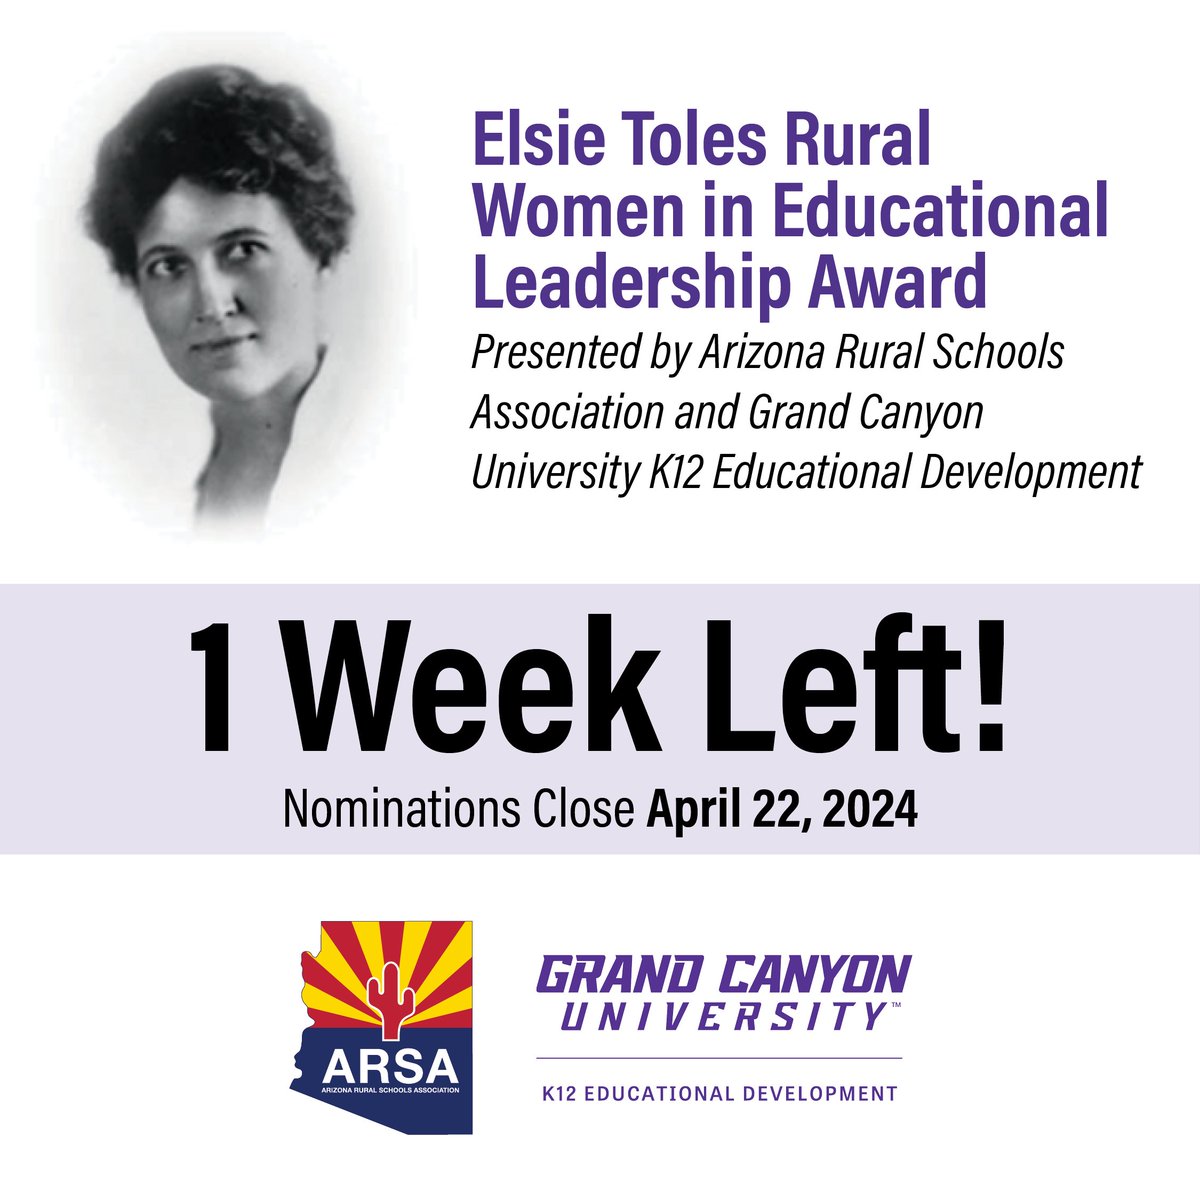 🔔 1 Week Left! The Elsie Toles Rural Women in Educational Leadership Award Application is available on our website. Self-nominations are accepted! Learn more and nominate today: azruralschools.org/elsie-toles-aw…